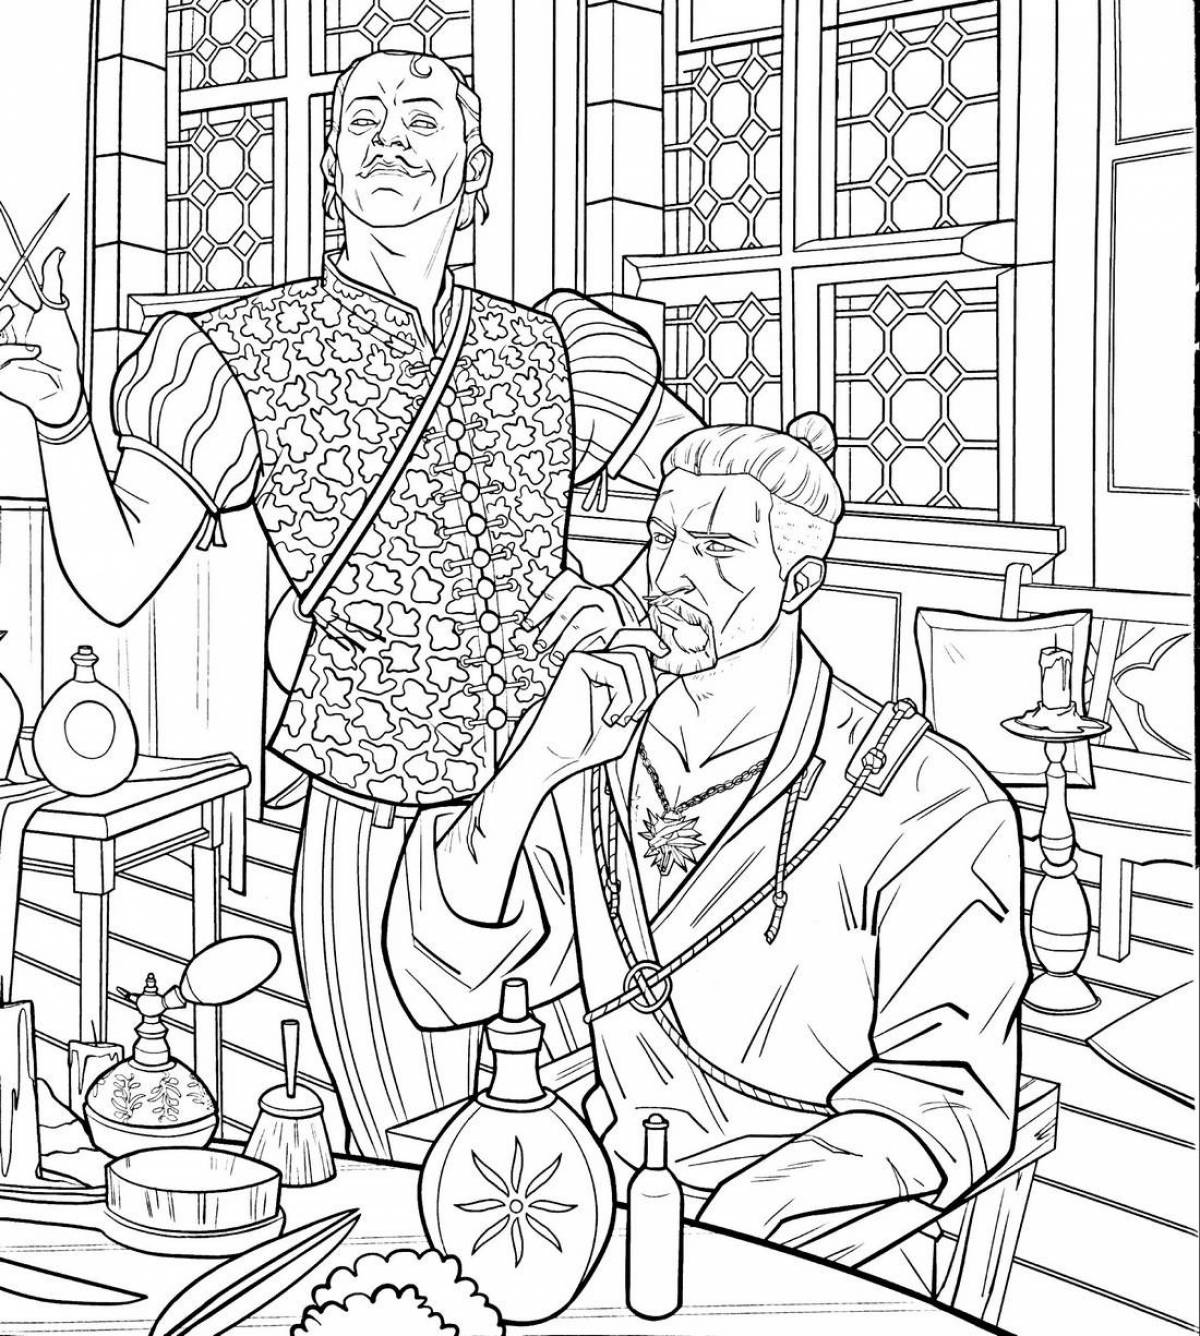 Amazing witcher coloring book